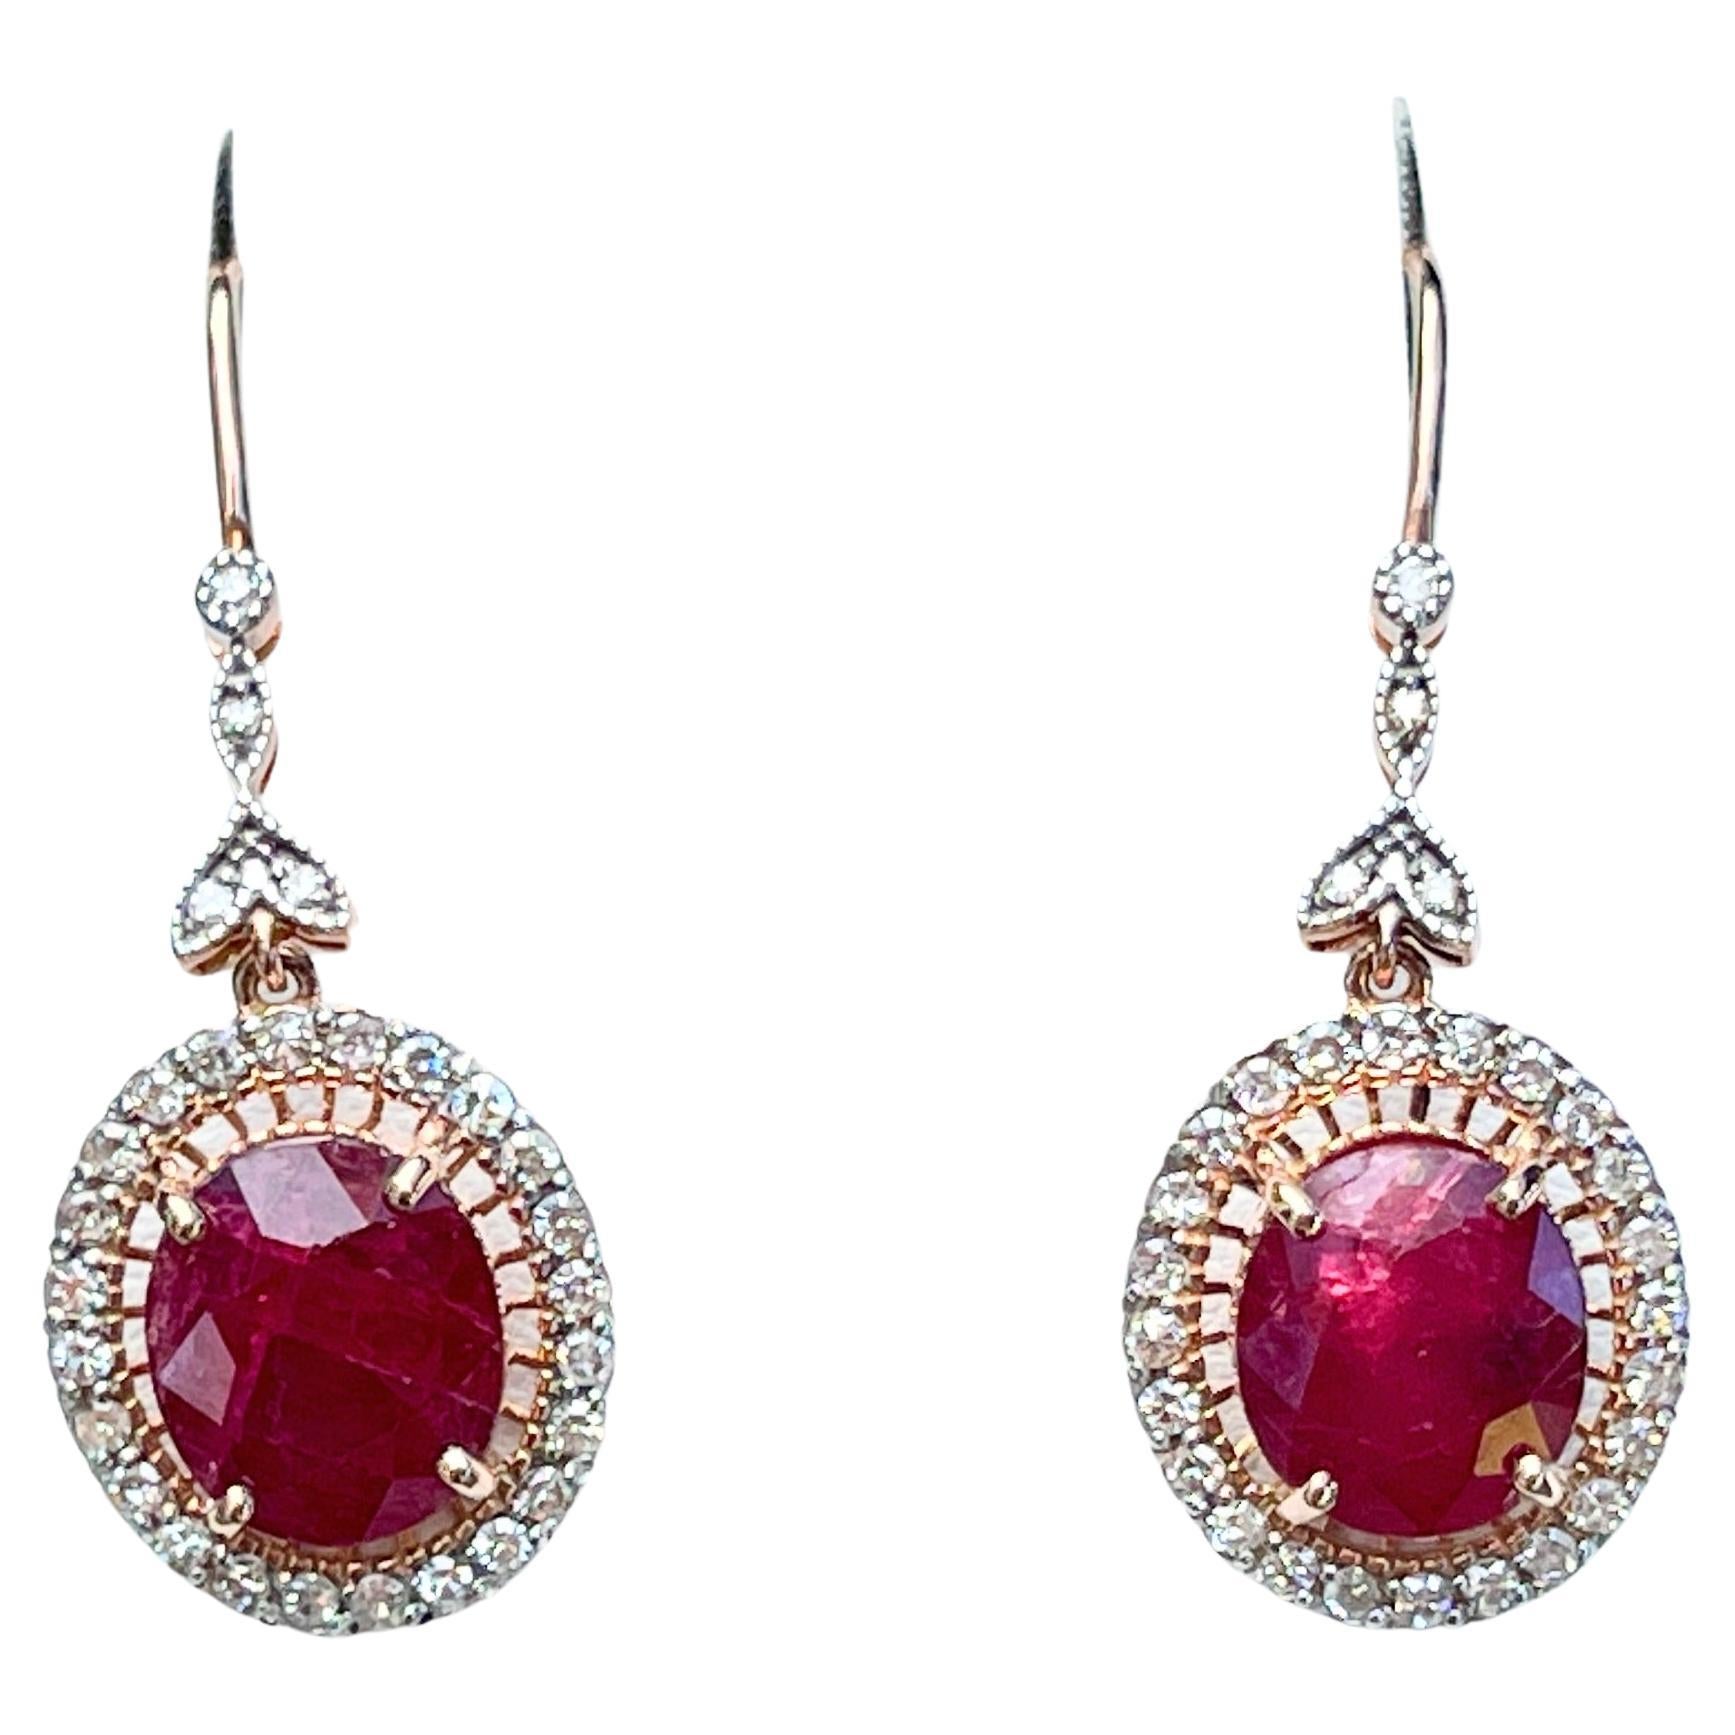 Belle Epoque Style Ruby Diamond Dangle Hook Earrings 14ct Rose Gold Valuation For Sale